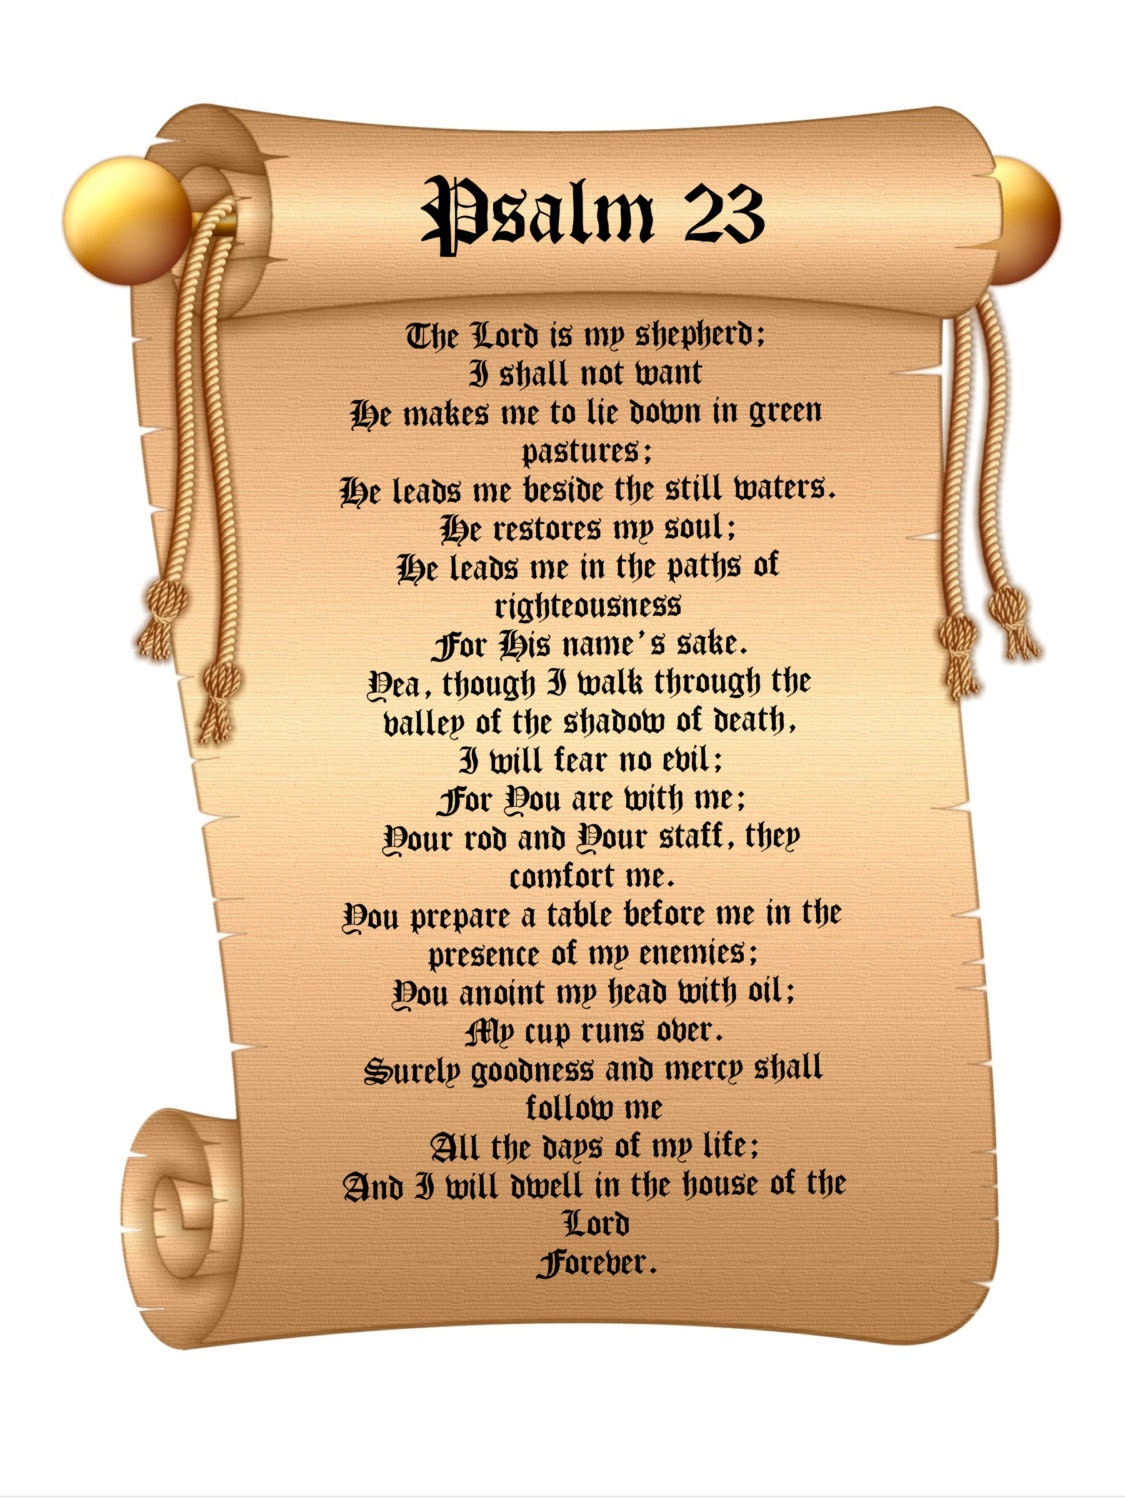 Psalm 23 poster. 23RD PSALM The LORD is my